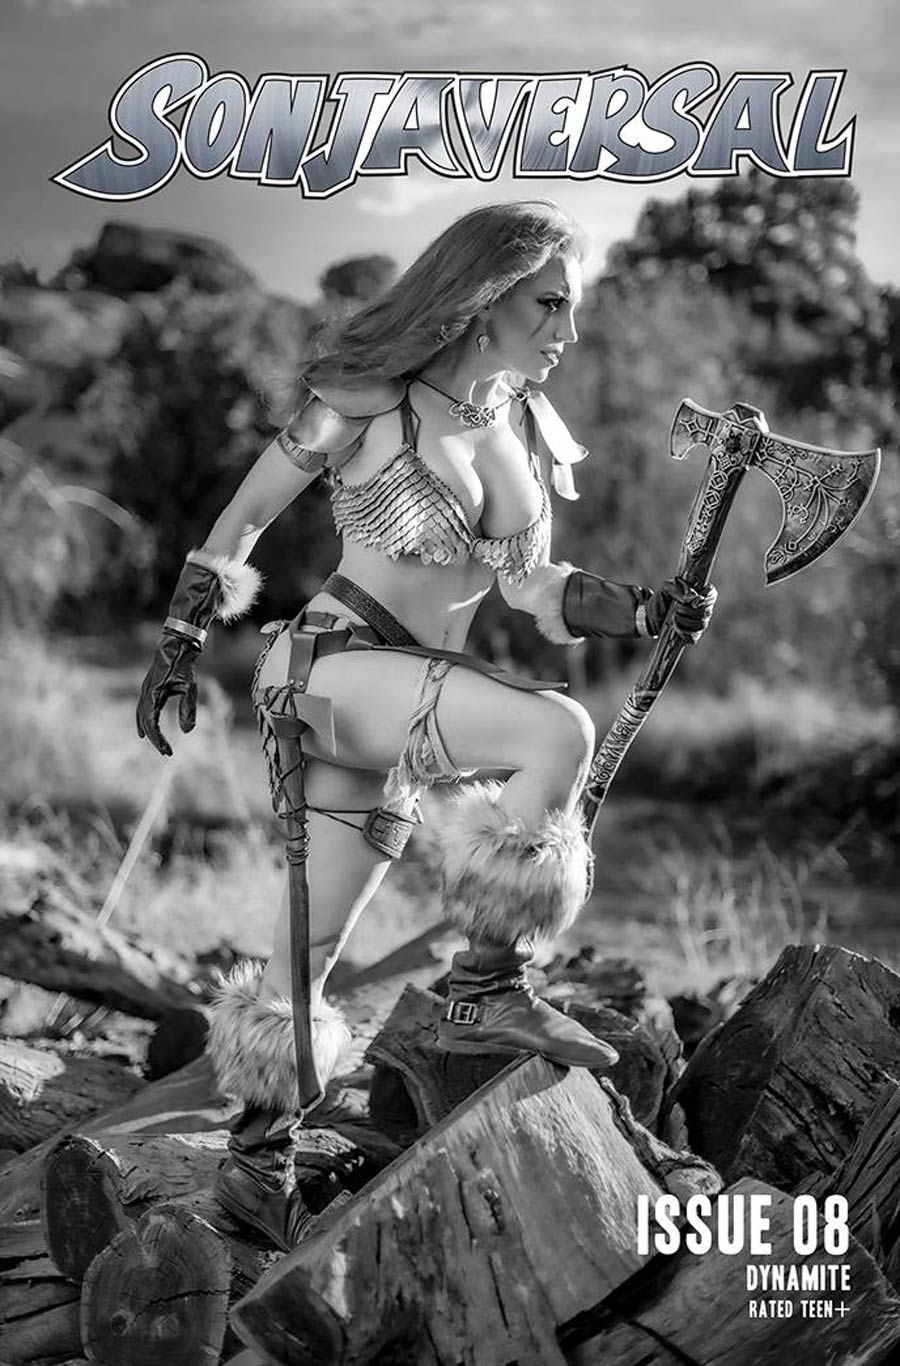 Sonjaversal #8 Cover I Incentive Gracie The Cosplay Lass Cosplay Photo Black & White Cover